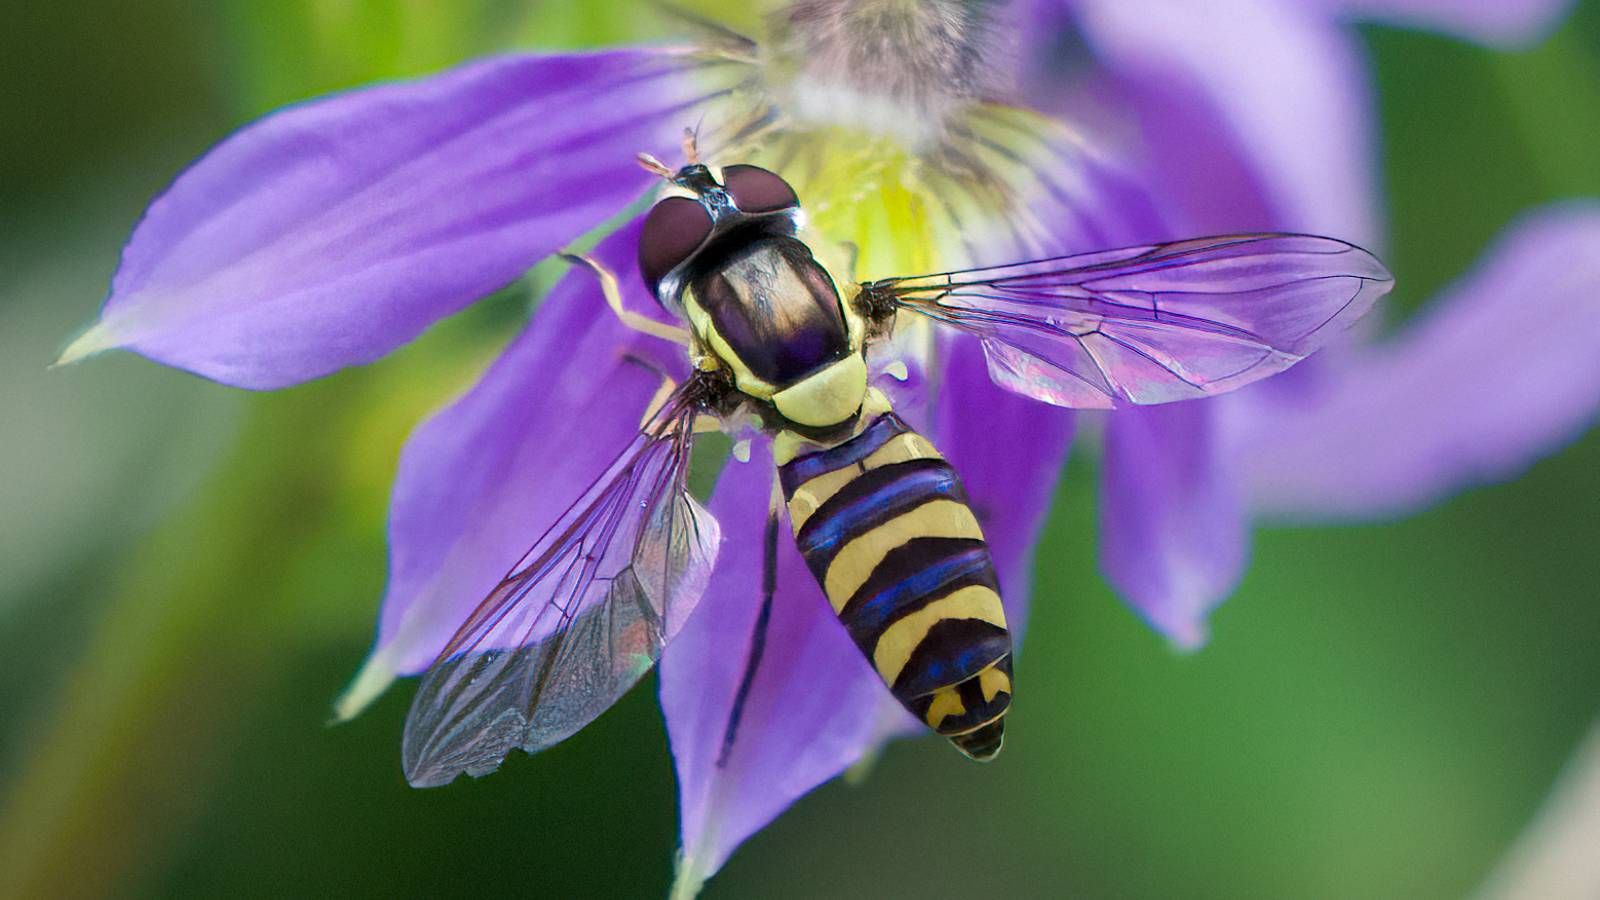 Blue and yellow banded hoverfly banner image